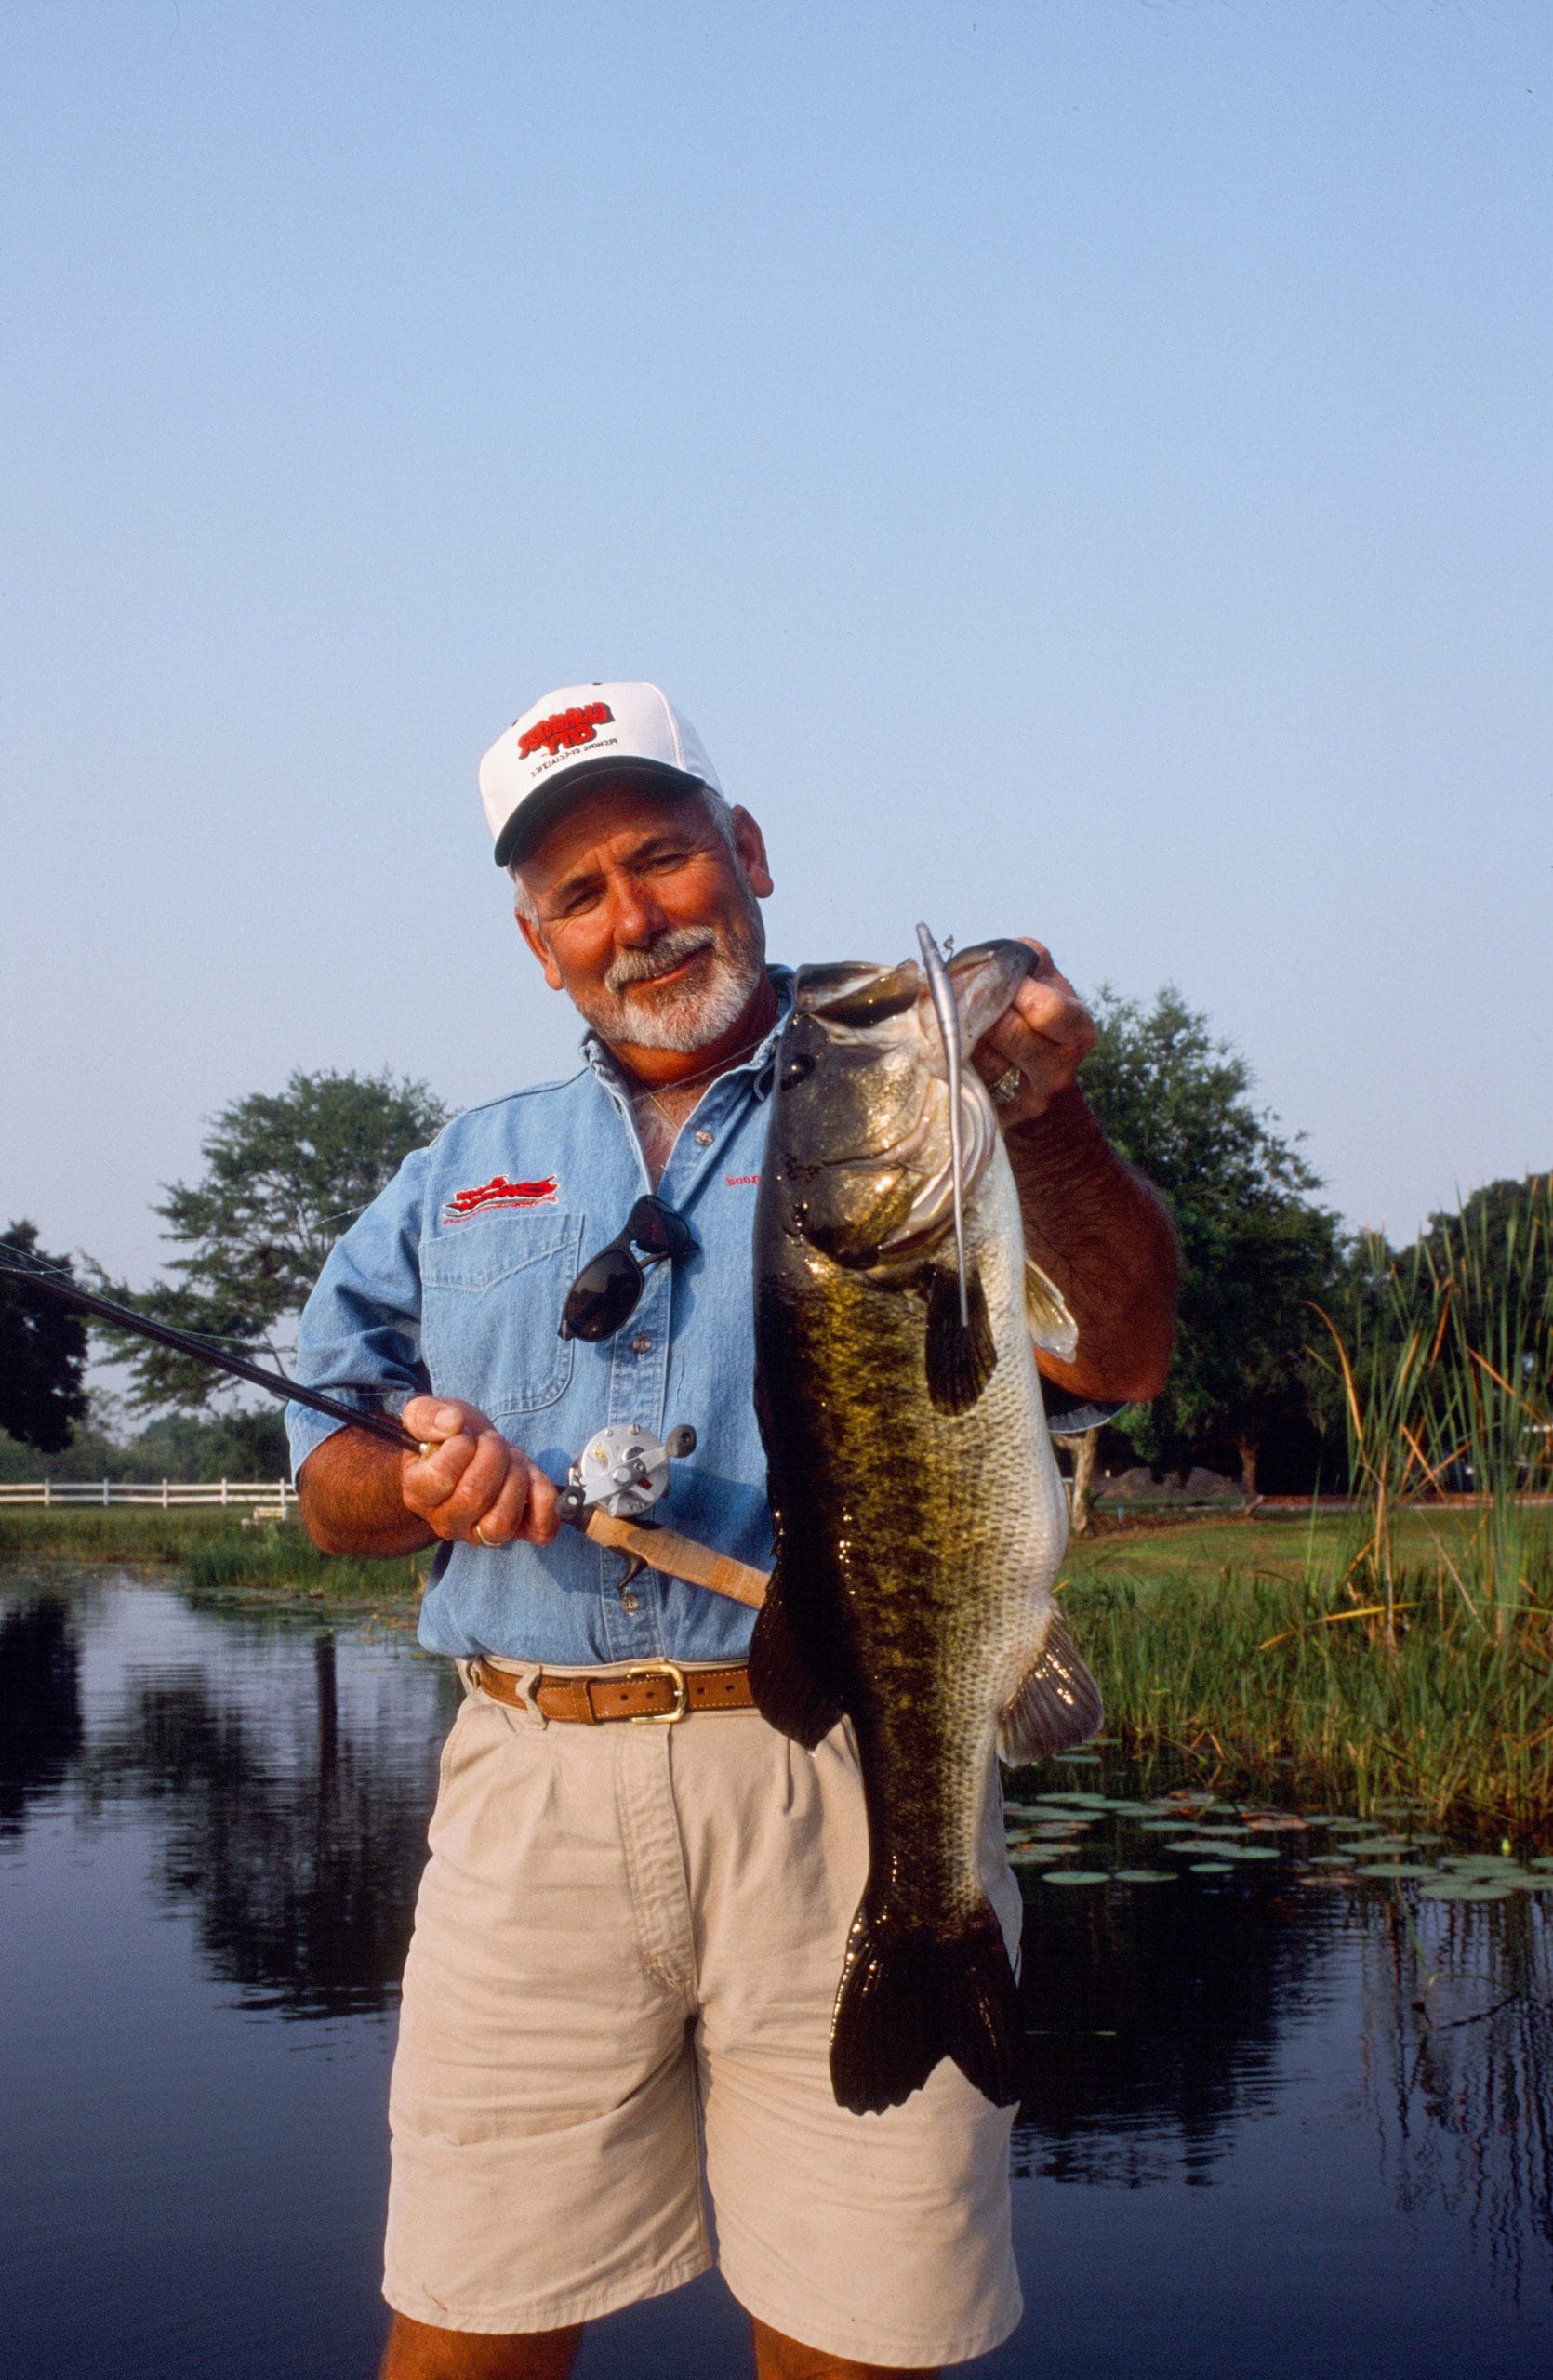 Some of the biggest bass of the year are caught during the pre-spawn by anglers who know the right tips for success.